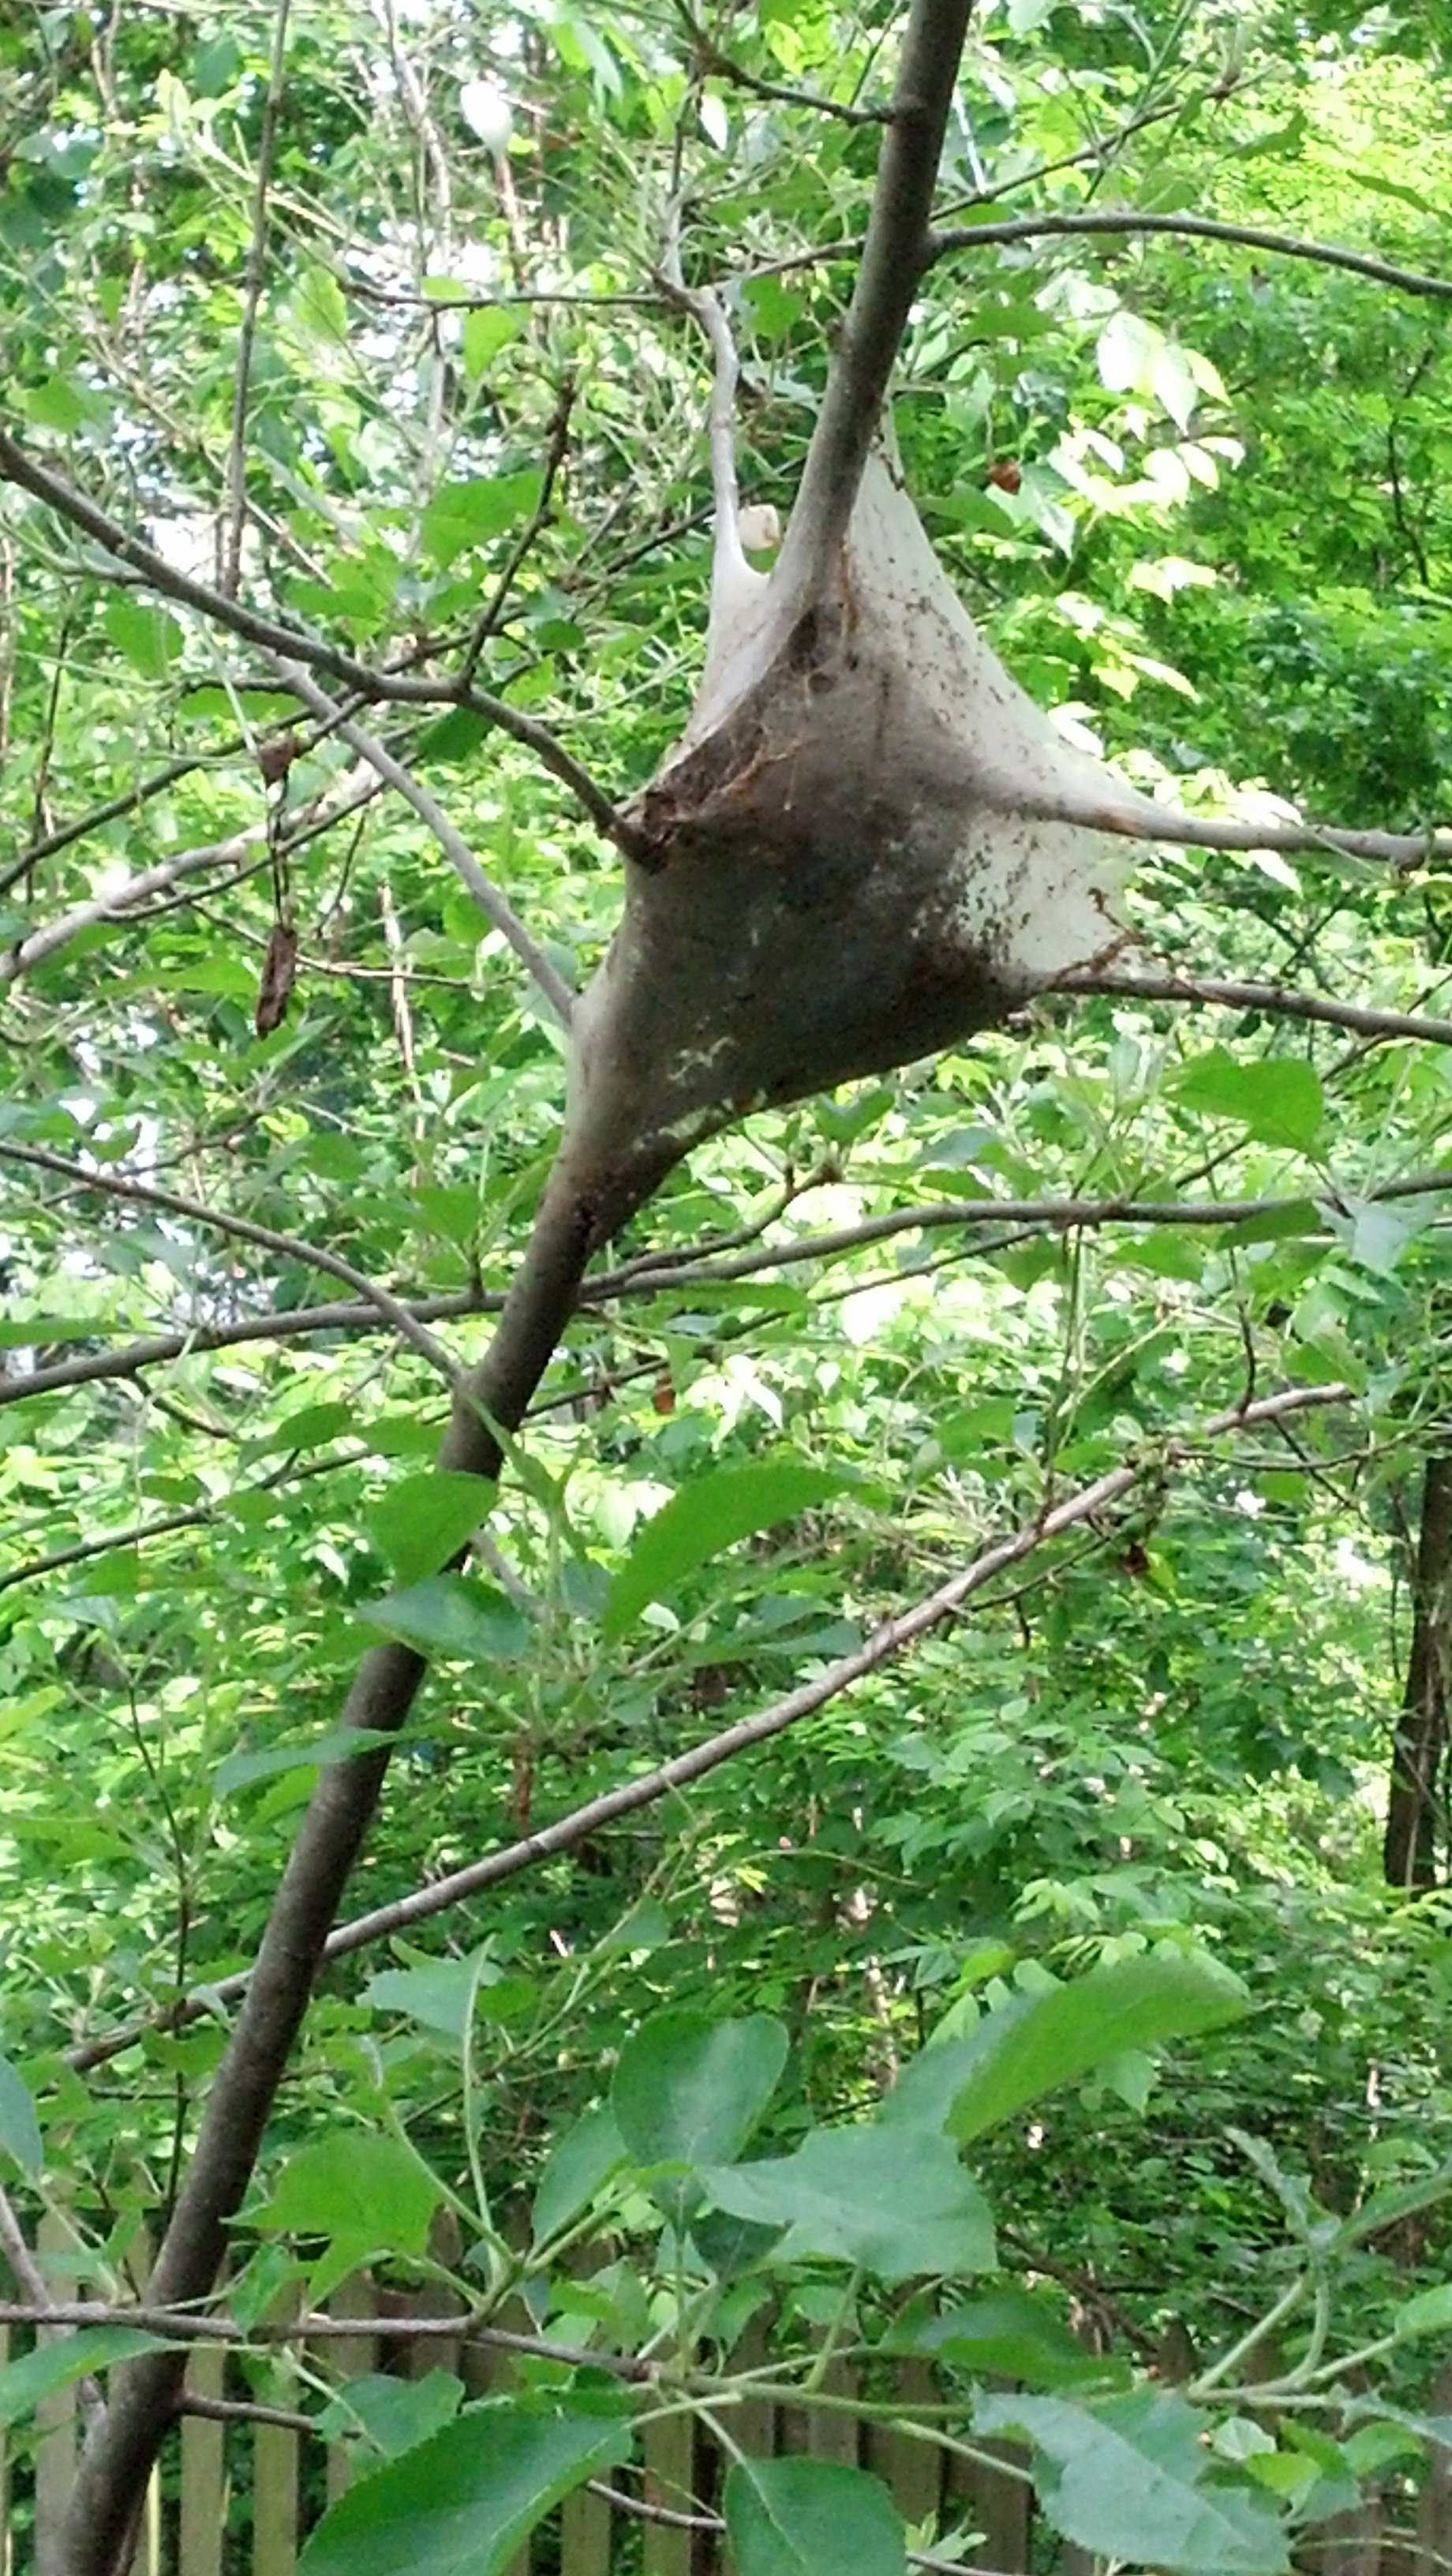 What is this Spiderweb-Like Thing in the Tree? - Ask an Expert